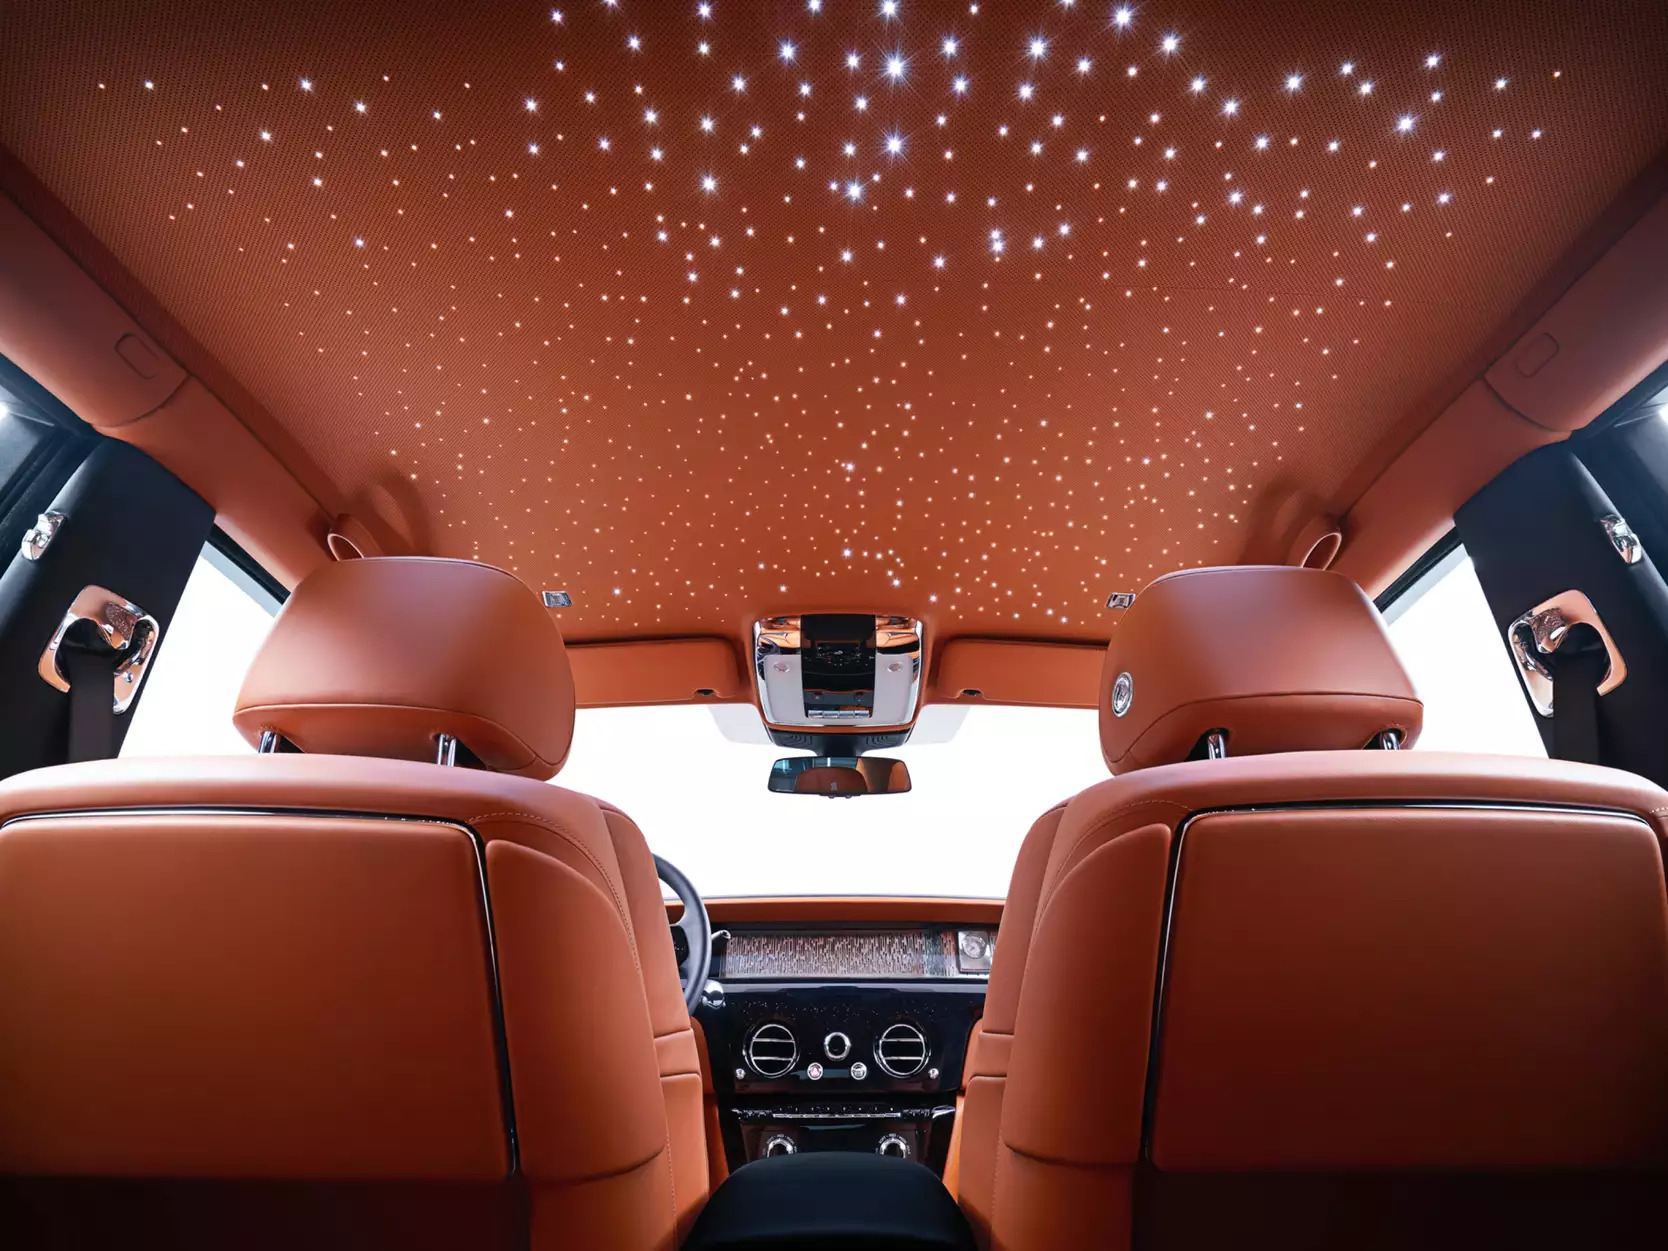 The RollsRoyce Inspired by Music Wraith Turns Up the Volume with an 18 Speaker Sound System  Architectural Digest